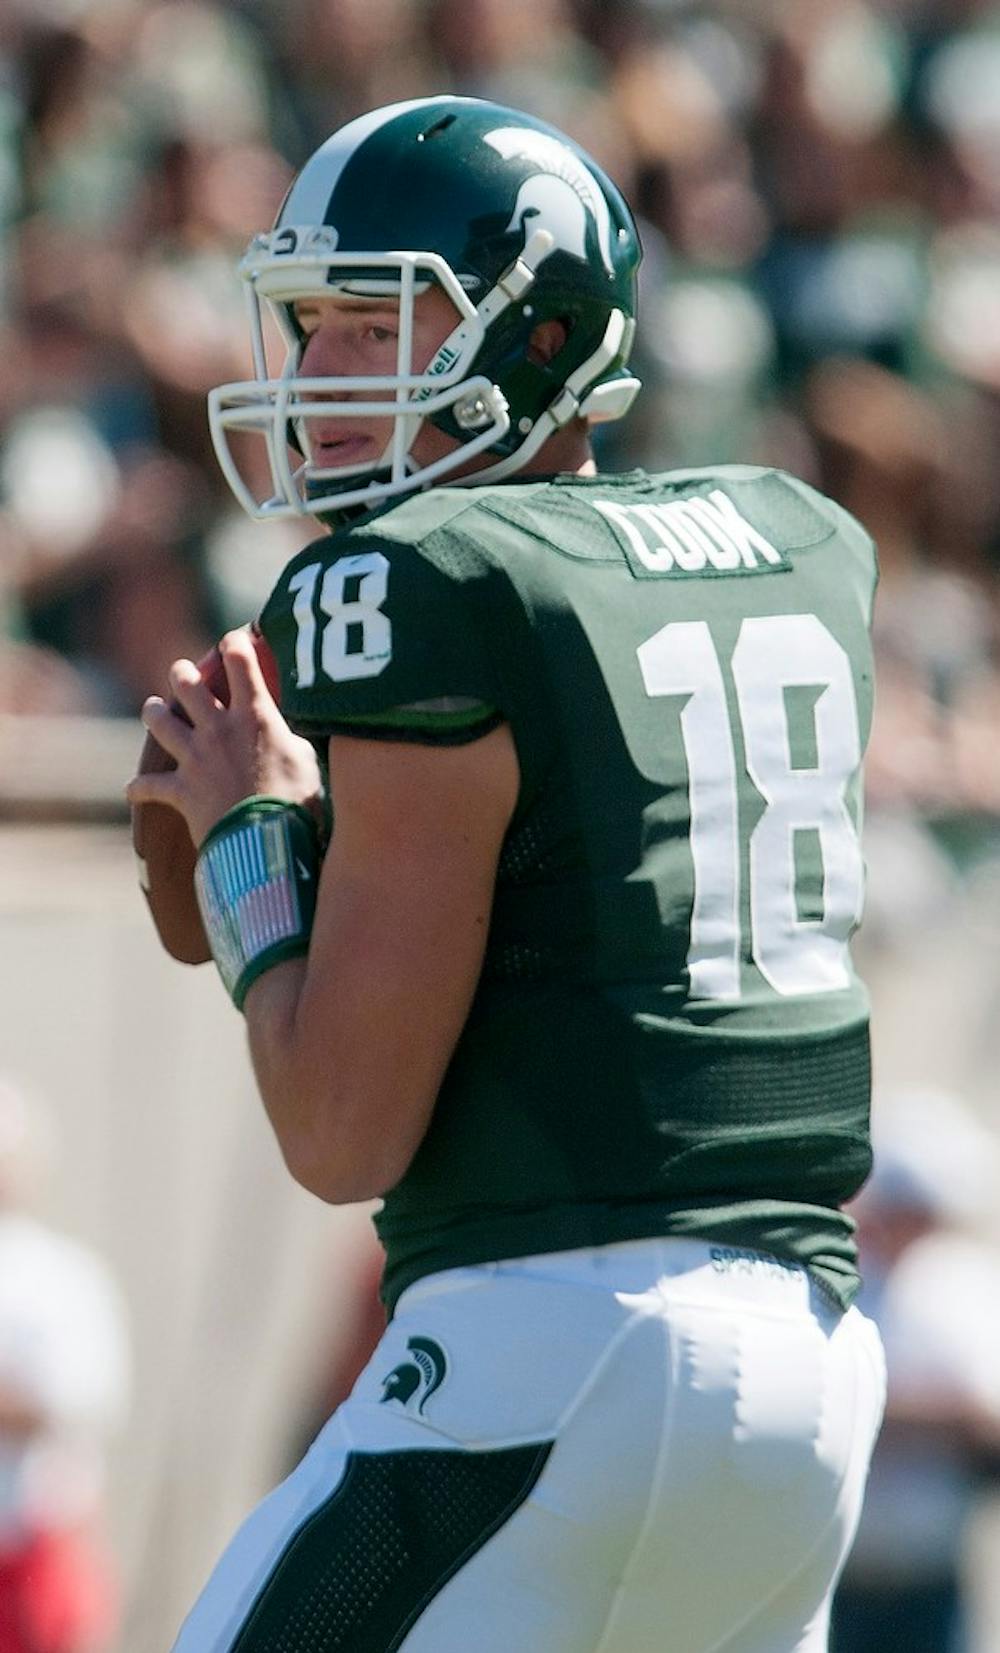 	<p>Sophomore quarterback Connor Cook looks to throw a pass on Sept. 14, 2013, at Spartan Stadium. The Spartans defeated Youngstown State, 55-17. Julia Nagy/The State News</p>